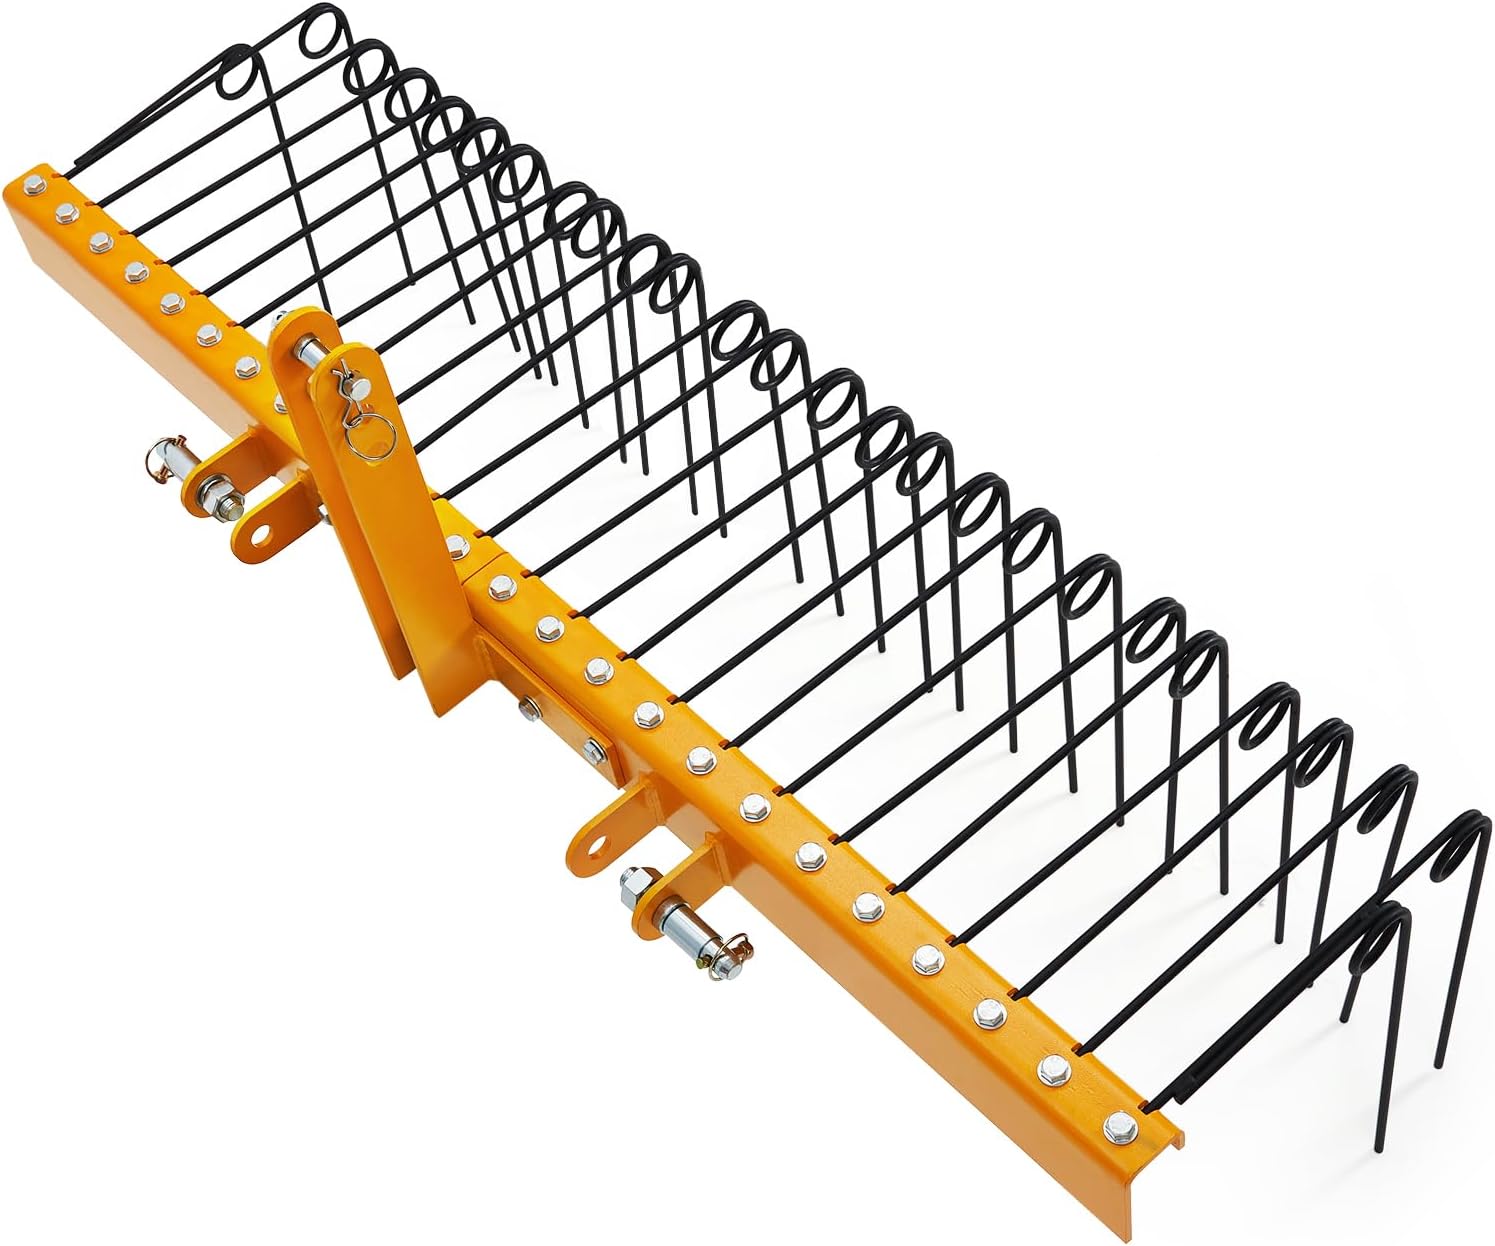 GARVEE 60 Inch Pine Straw Rake: 26 Coil Spring Tines, Fits Cat0 Cat1 Tractors